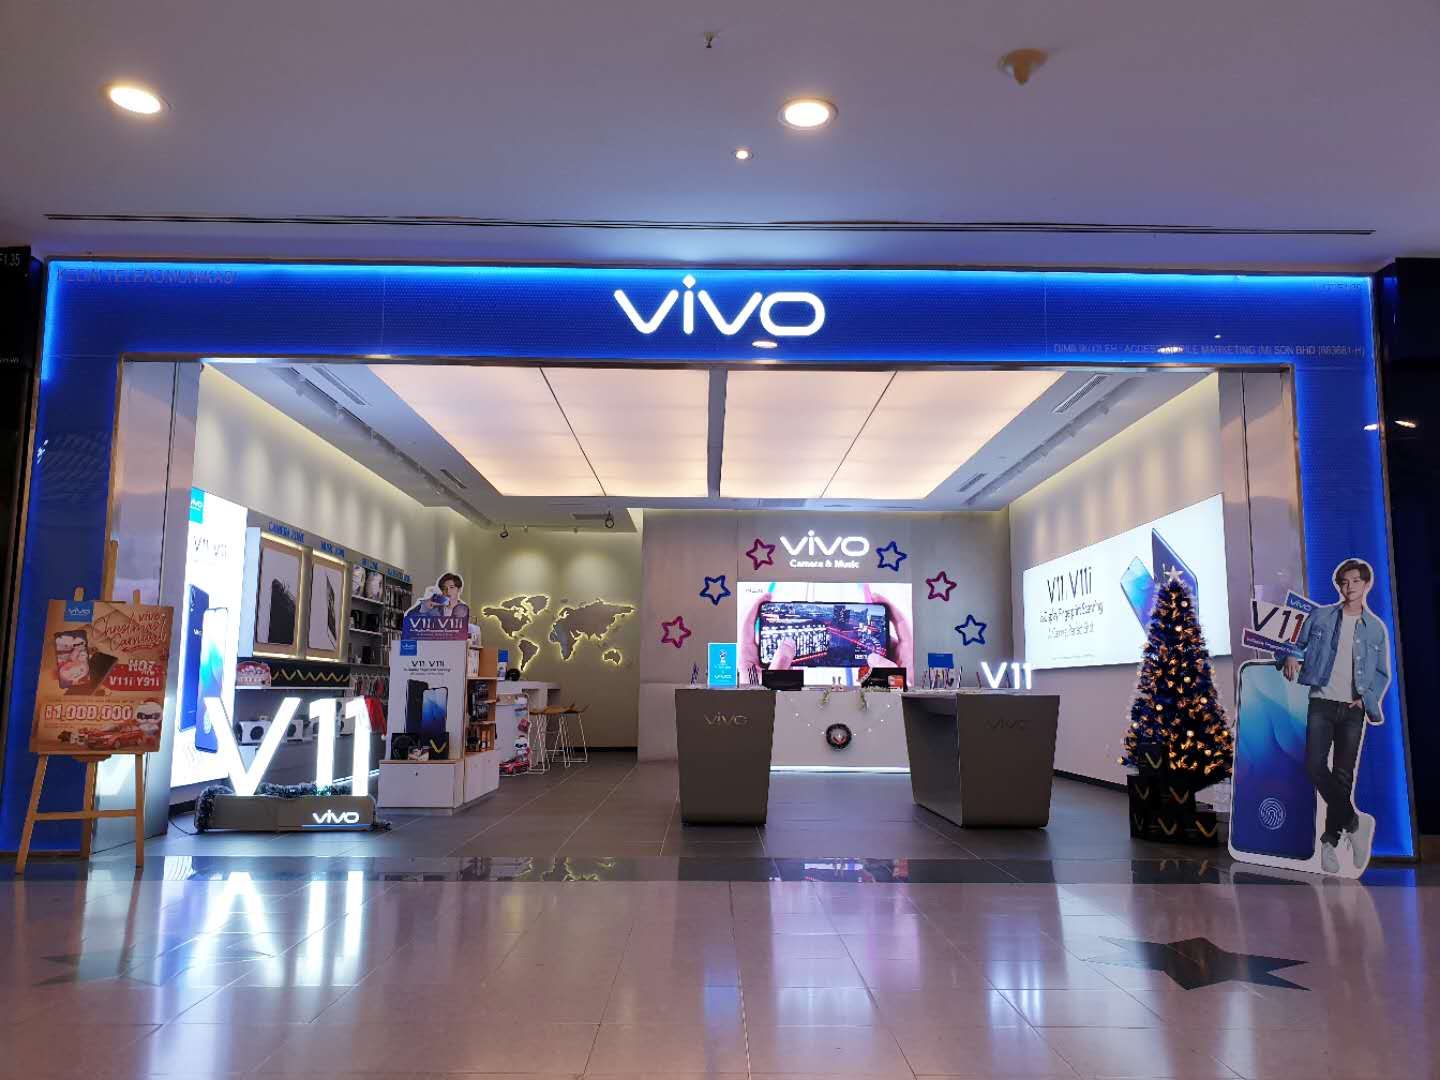 Enjoy multiples gifts when you visit the vivo concept store at Sunway Pyramid 1